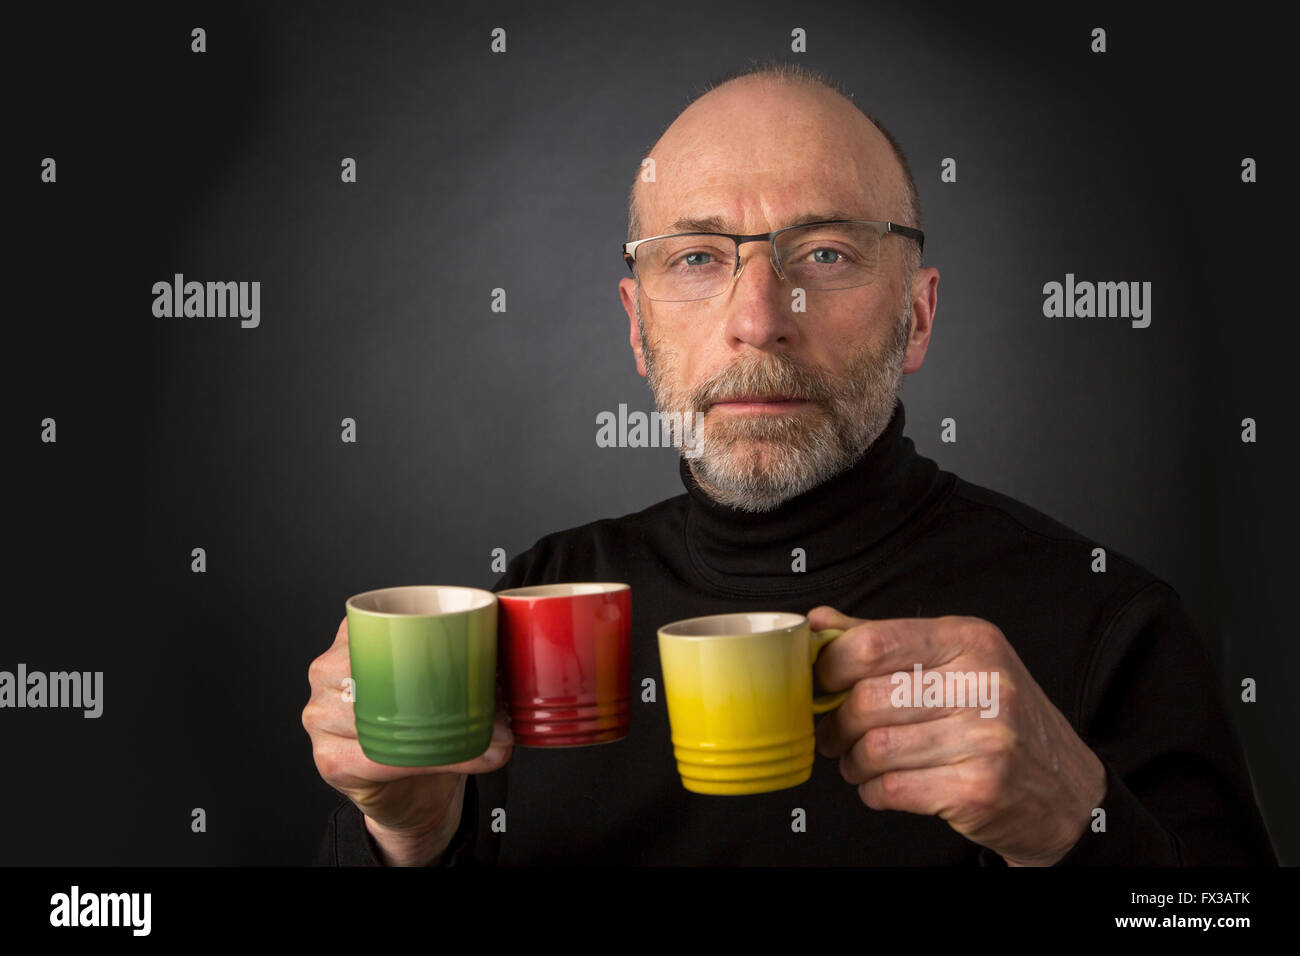 Morning coffee anybody? 60 years old  bald man with a beard and glasses carrying three espresso coffee cups Stock Photo